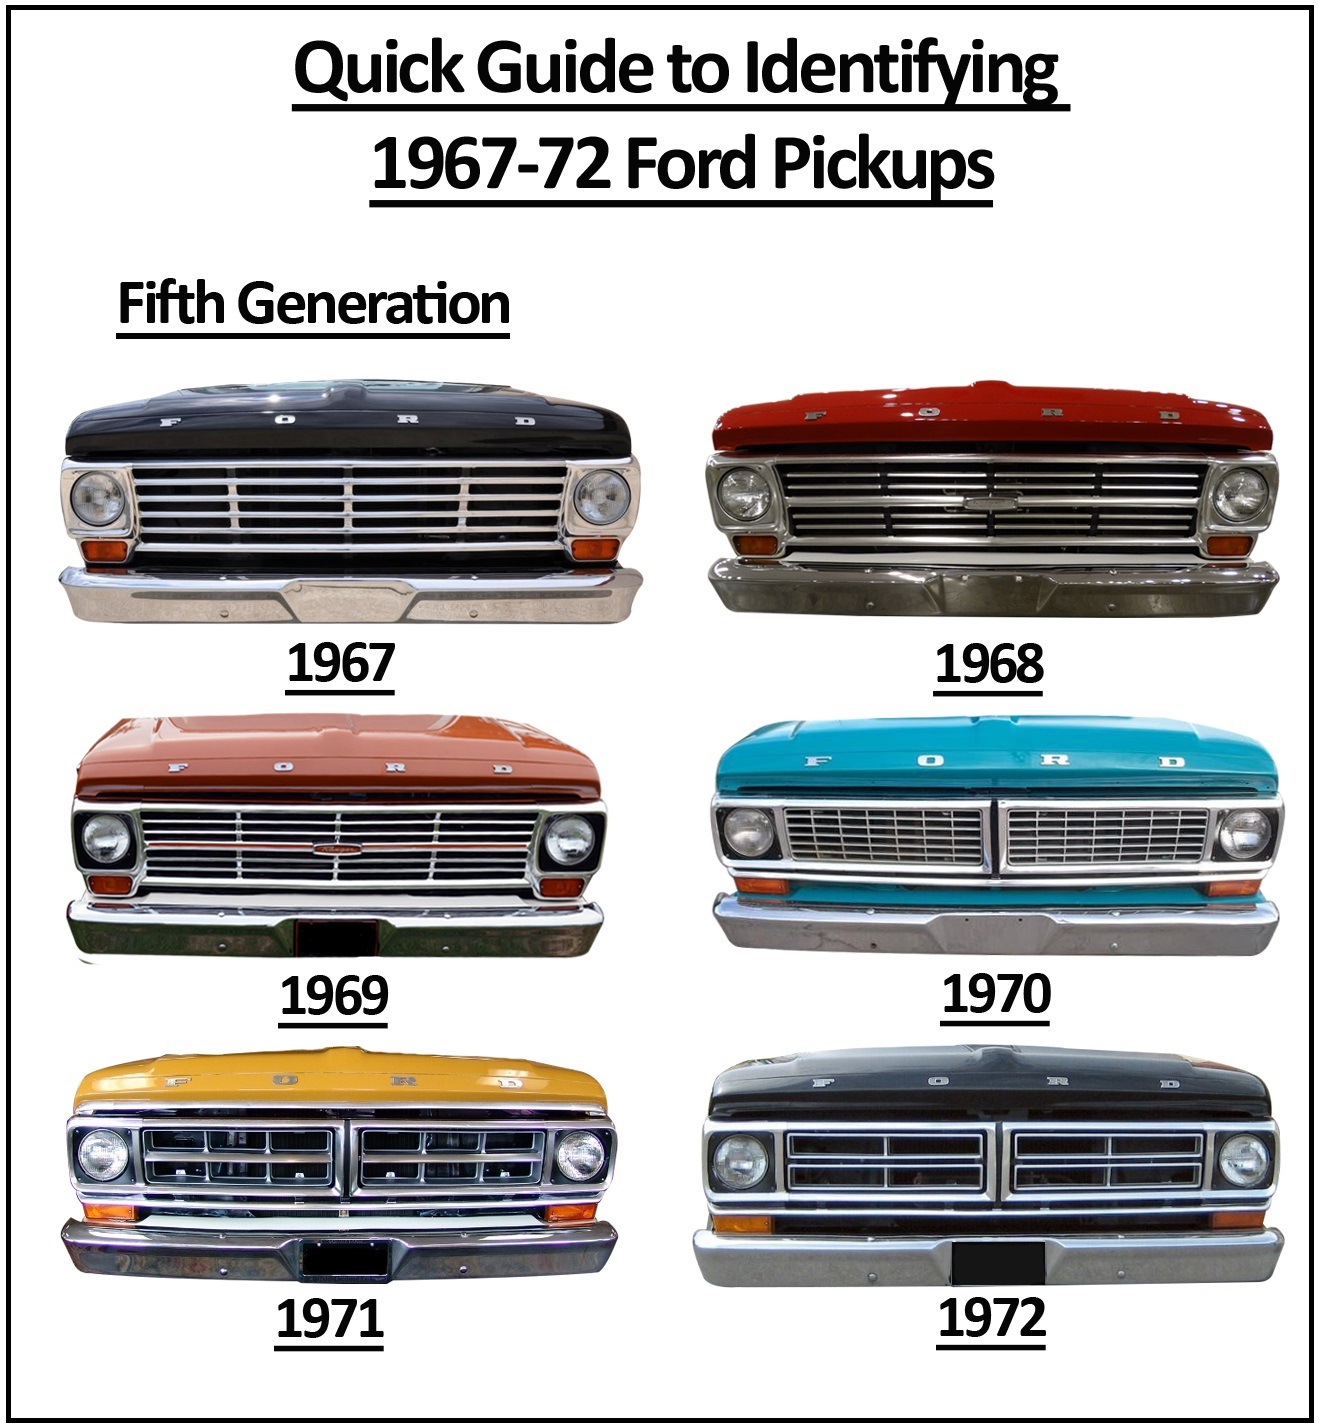 Ride Guides A Quick Guide To Identifying 1967 72 Ford Trucks